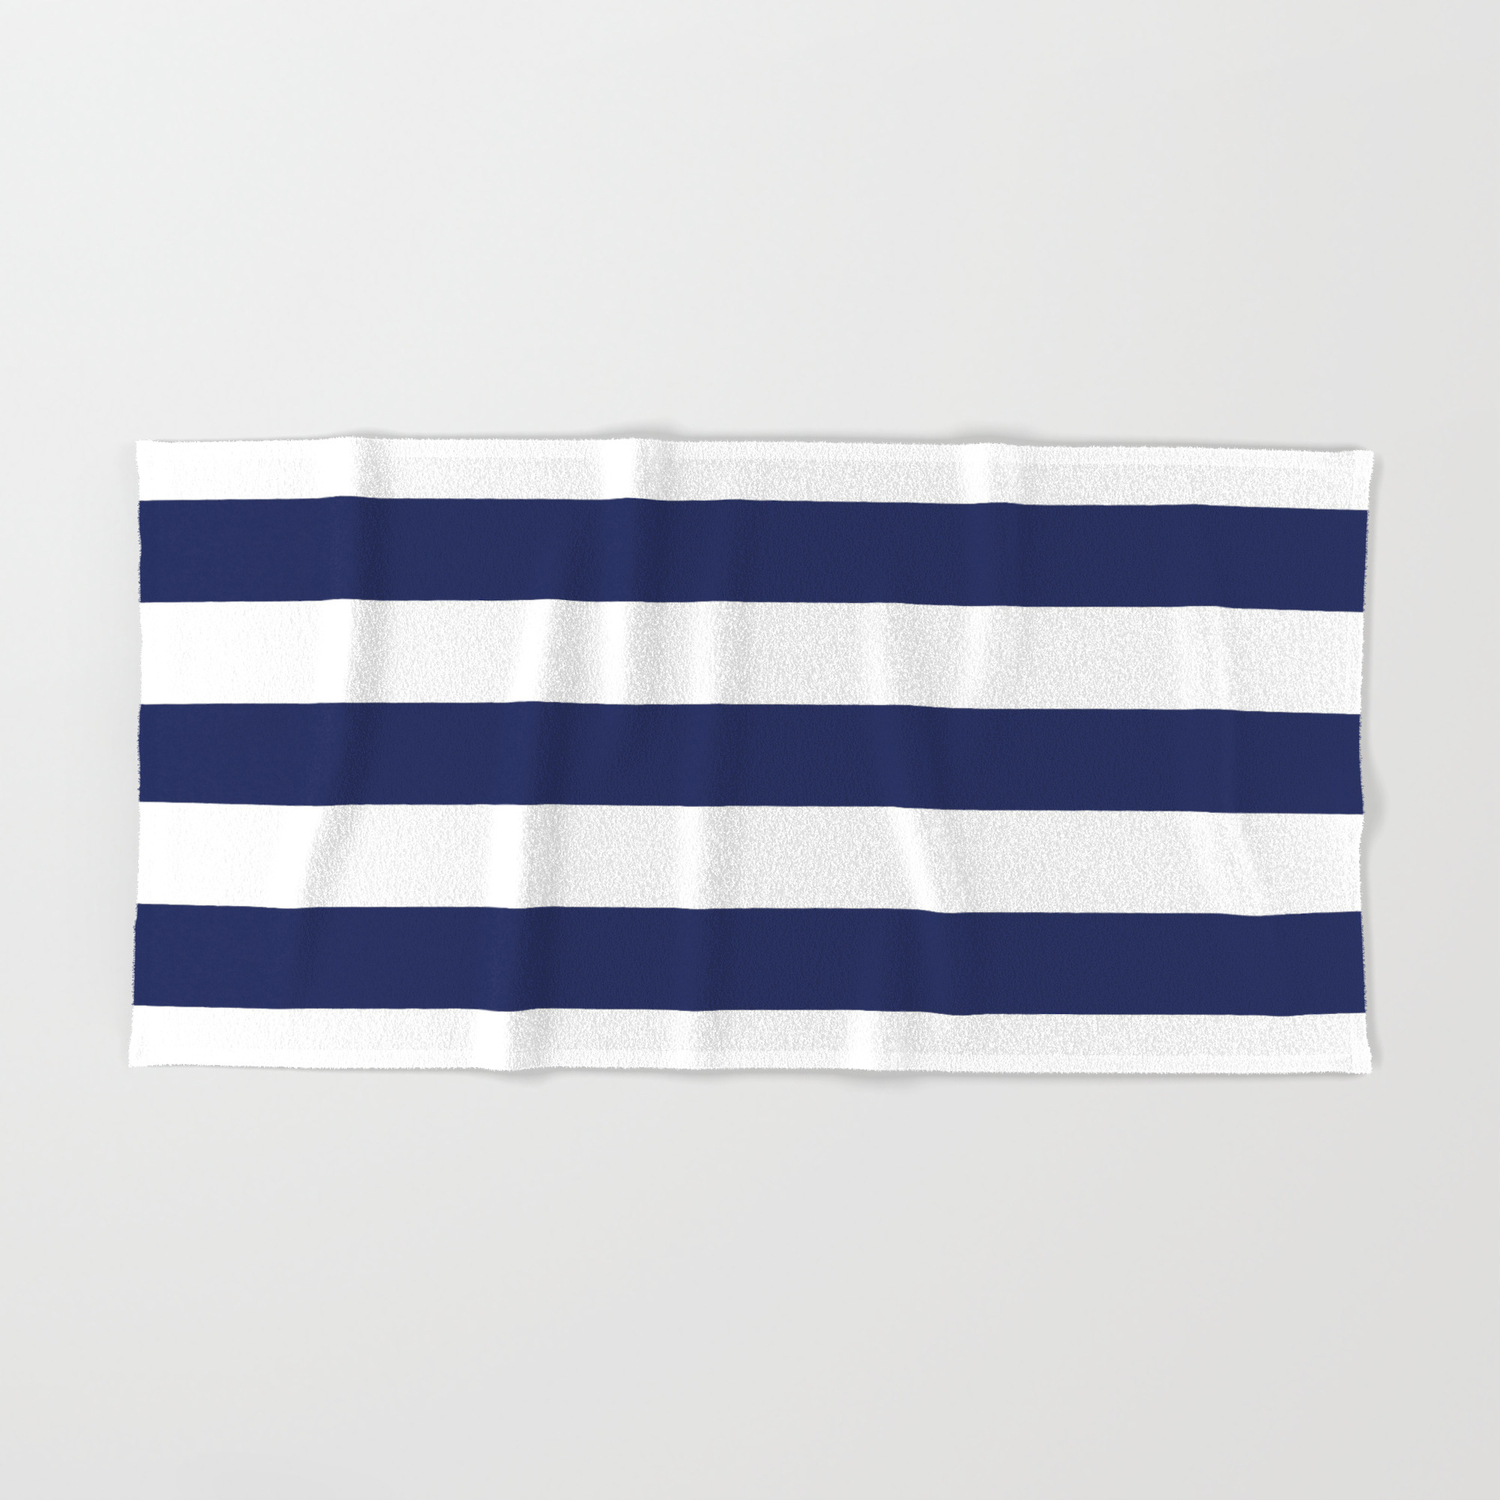 blue and white towels